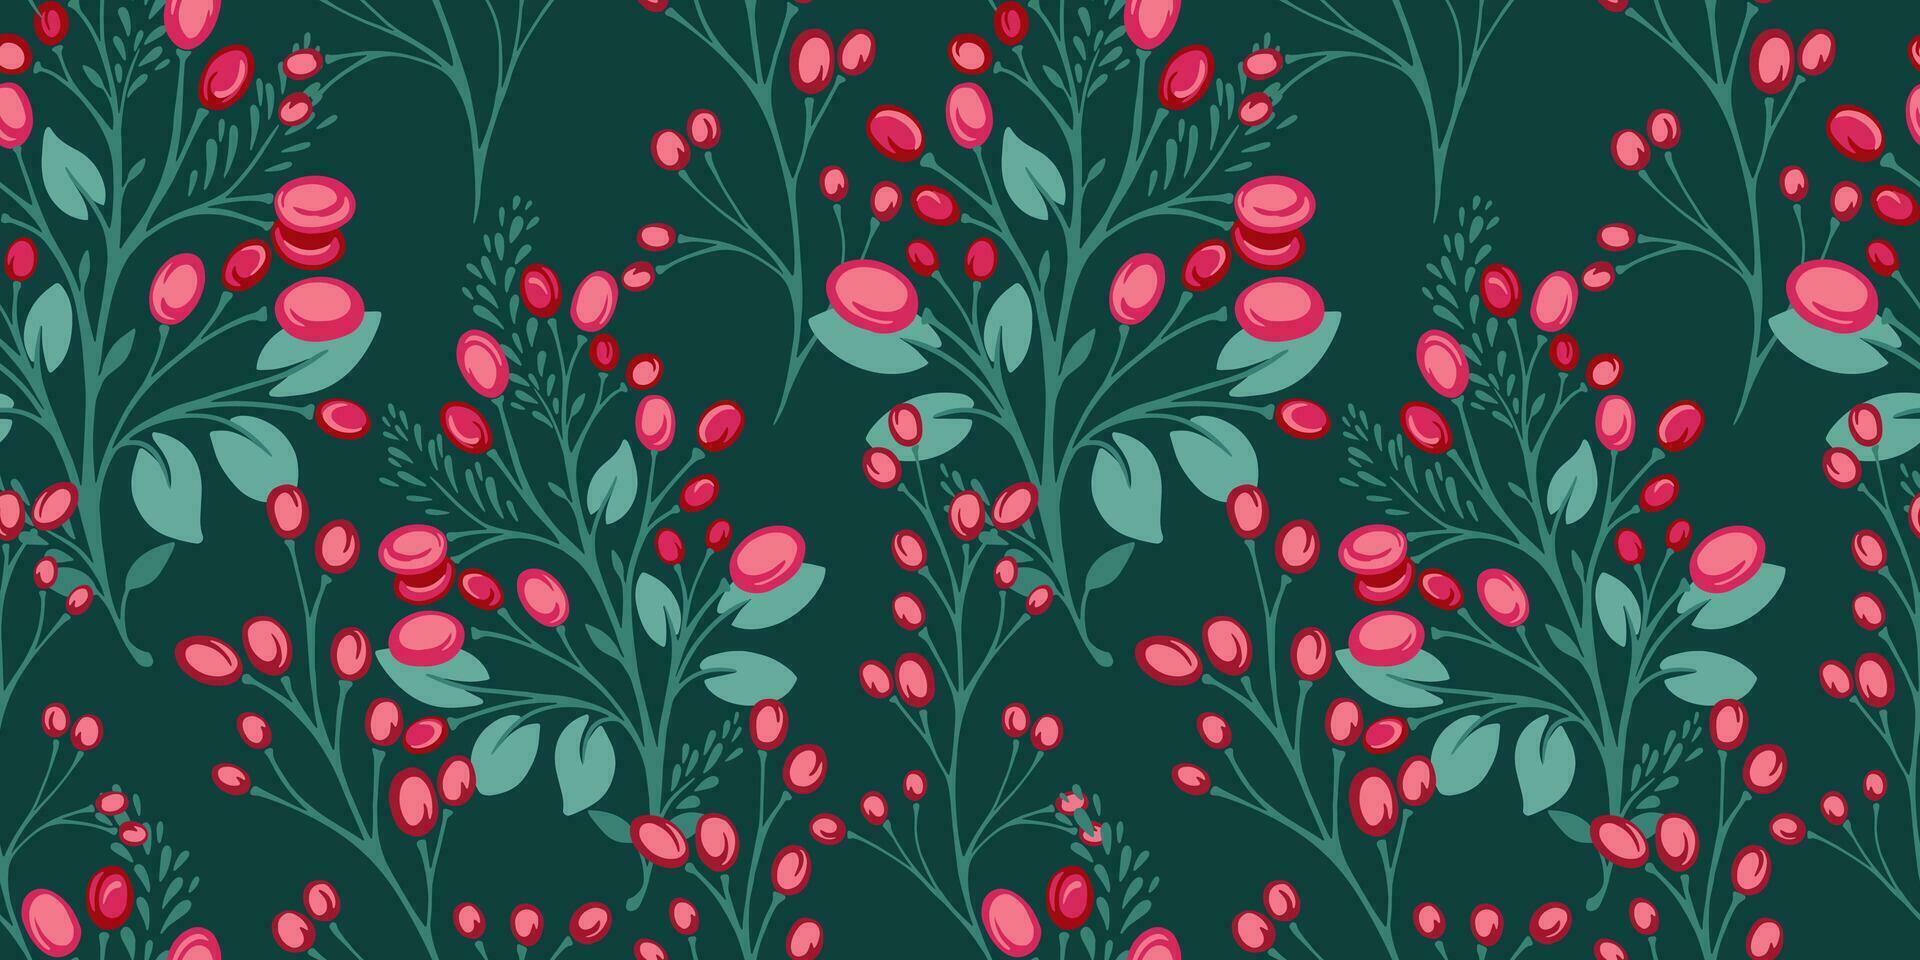 Seamless pattern with abstract, artistic, stylized branches red berries with drops, dots, spots. Vector hand drawn sketch. Template for design, fashion, paper, cover, fabric, interior decor, wallpaper